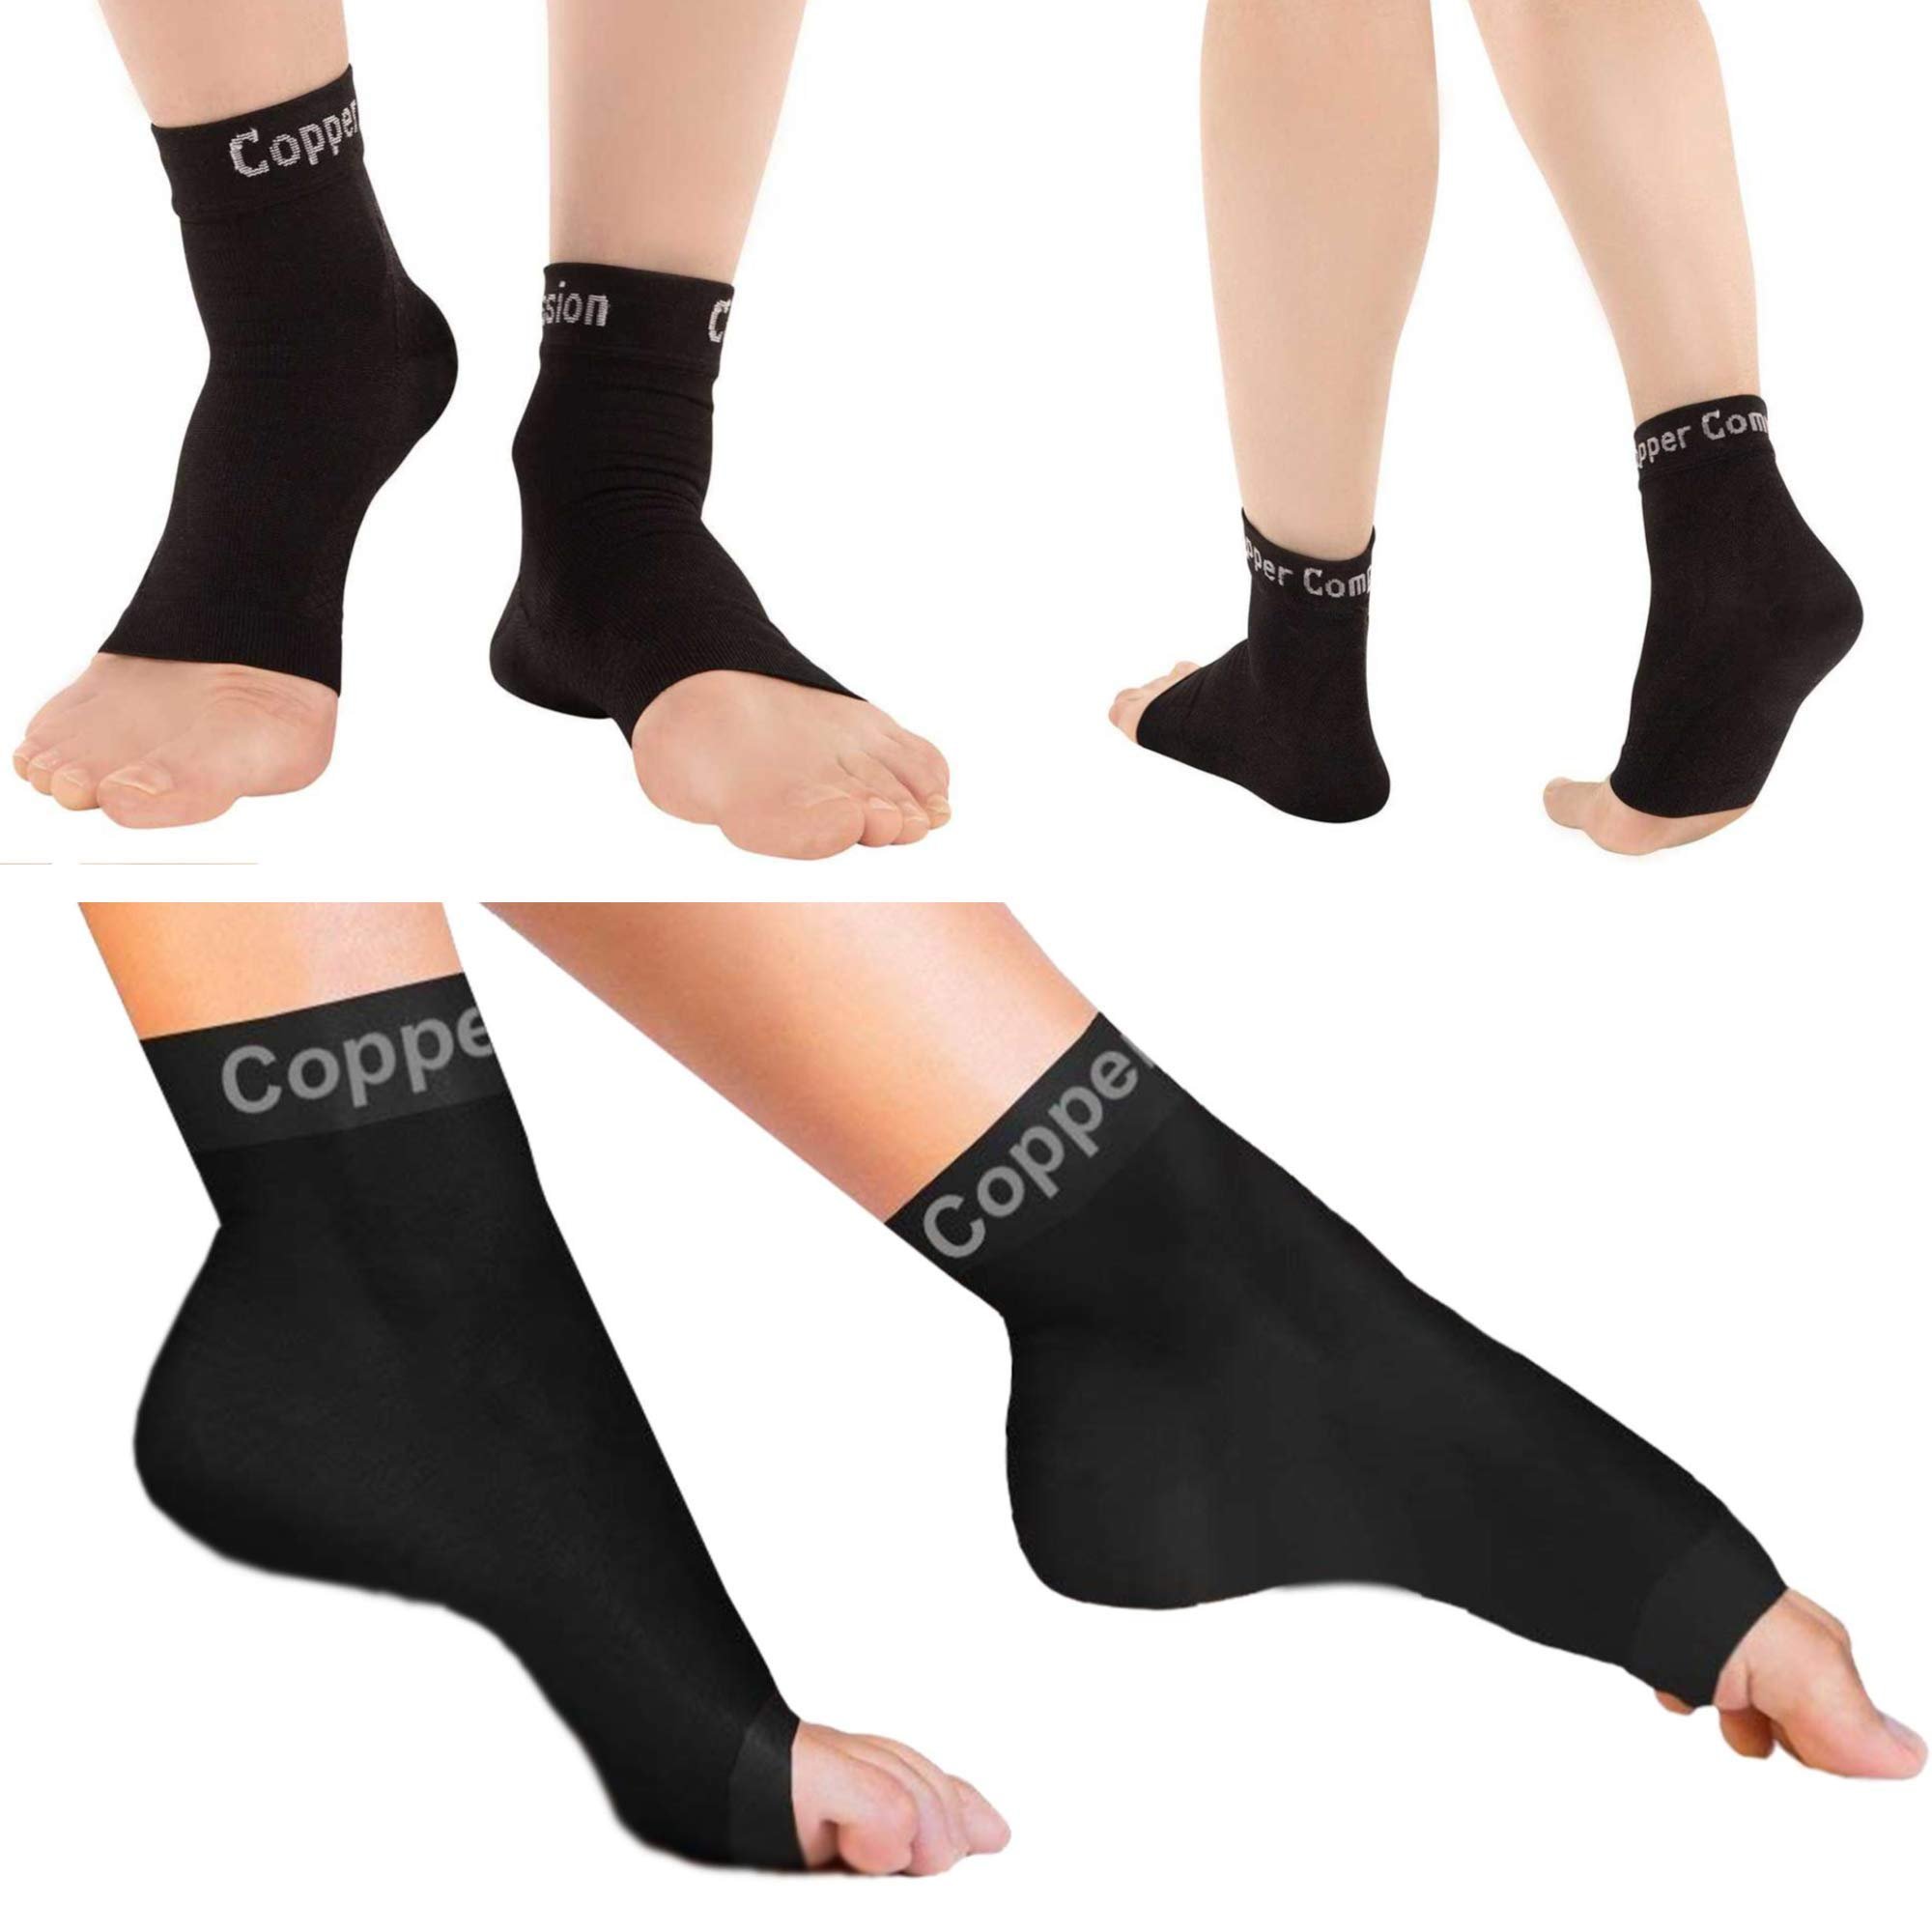 Book Cover Copper Compression Recovery Foot Sleeves / Plantar Fasciitis Support Socks - Speed Up Recovery & Provide Relief Of Heel Spurs, Arch Pain, Foot Swelling & Ankle Injuries 1 Pair (Large) Large (1 Pair)